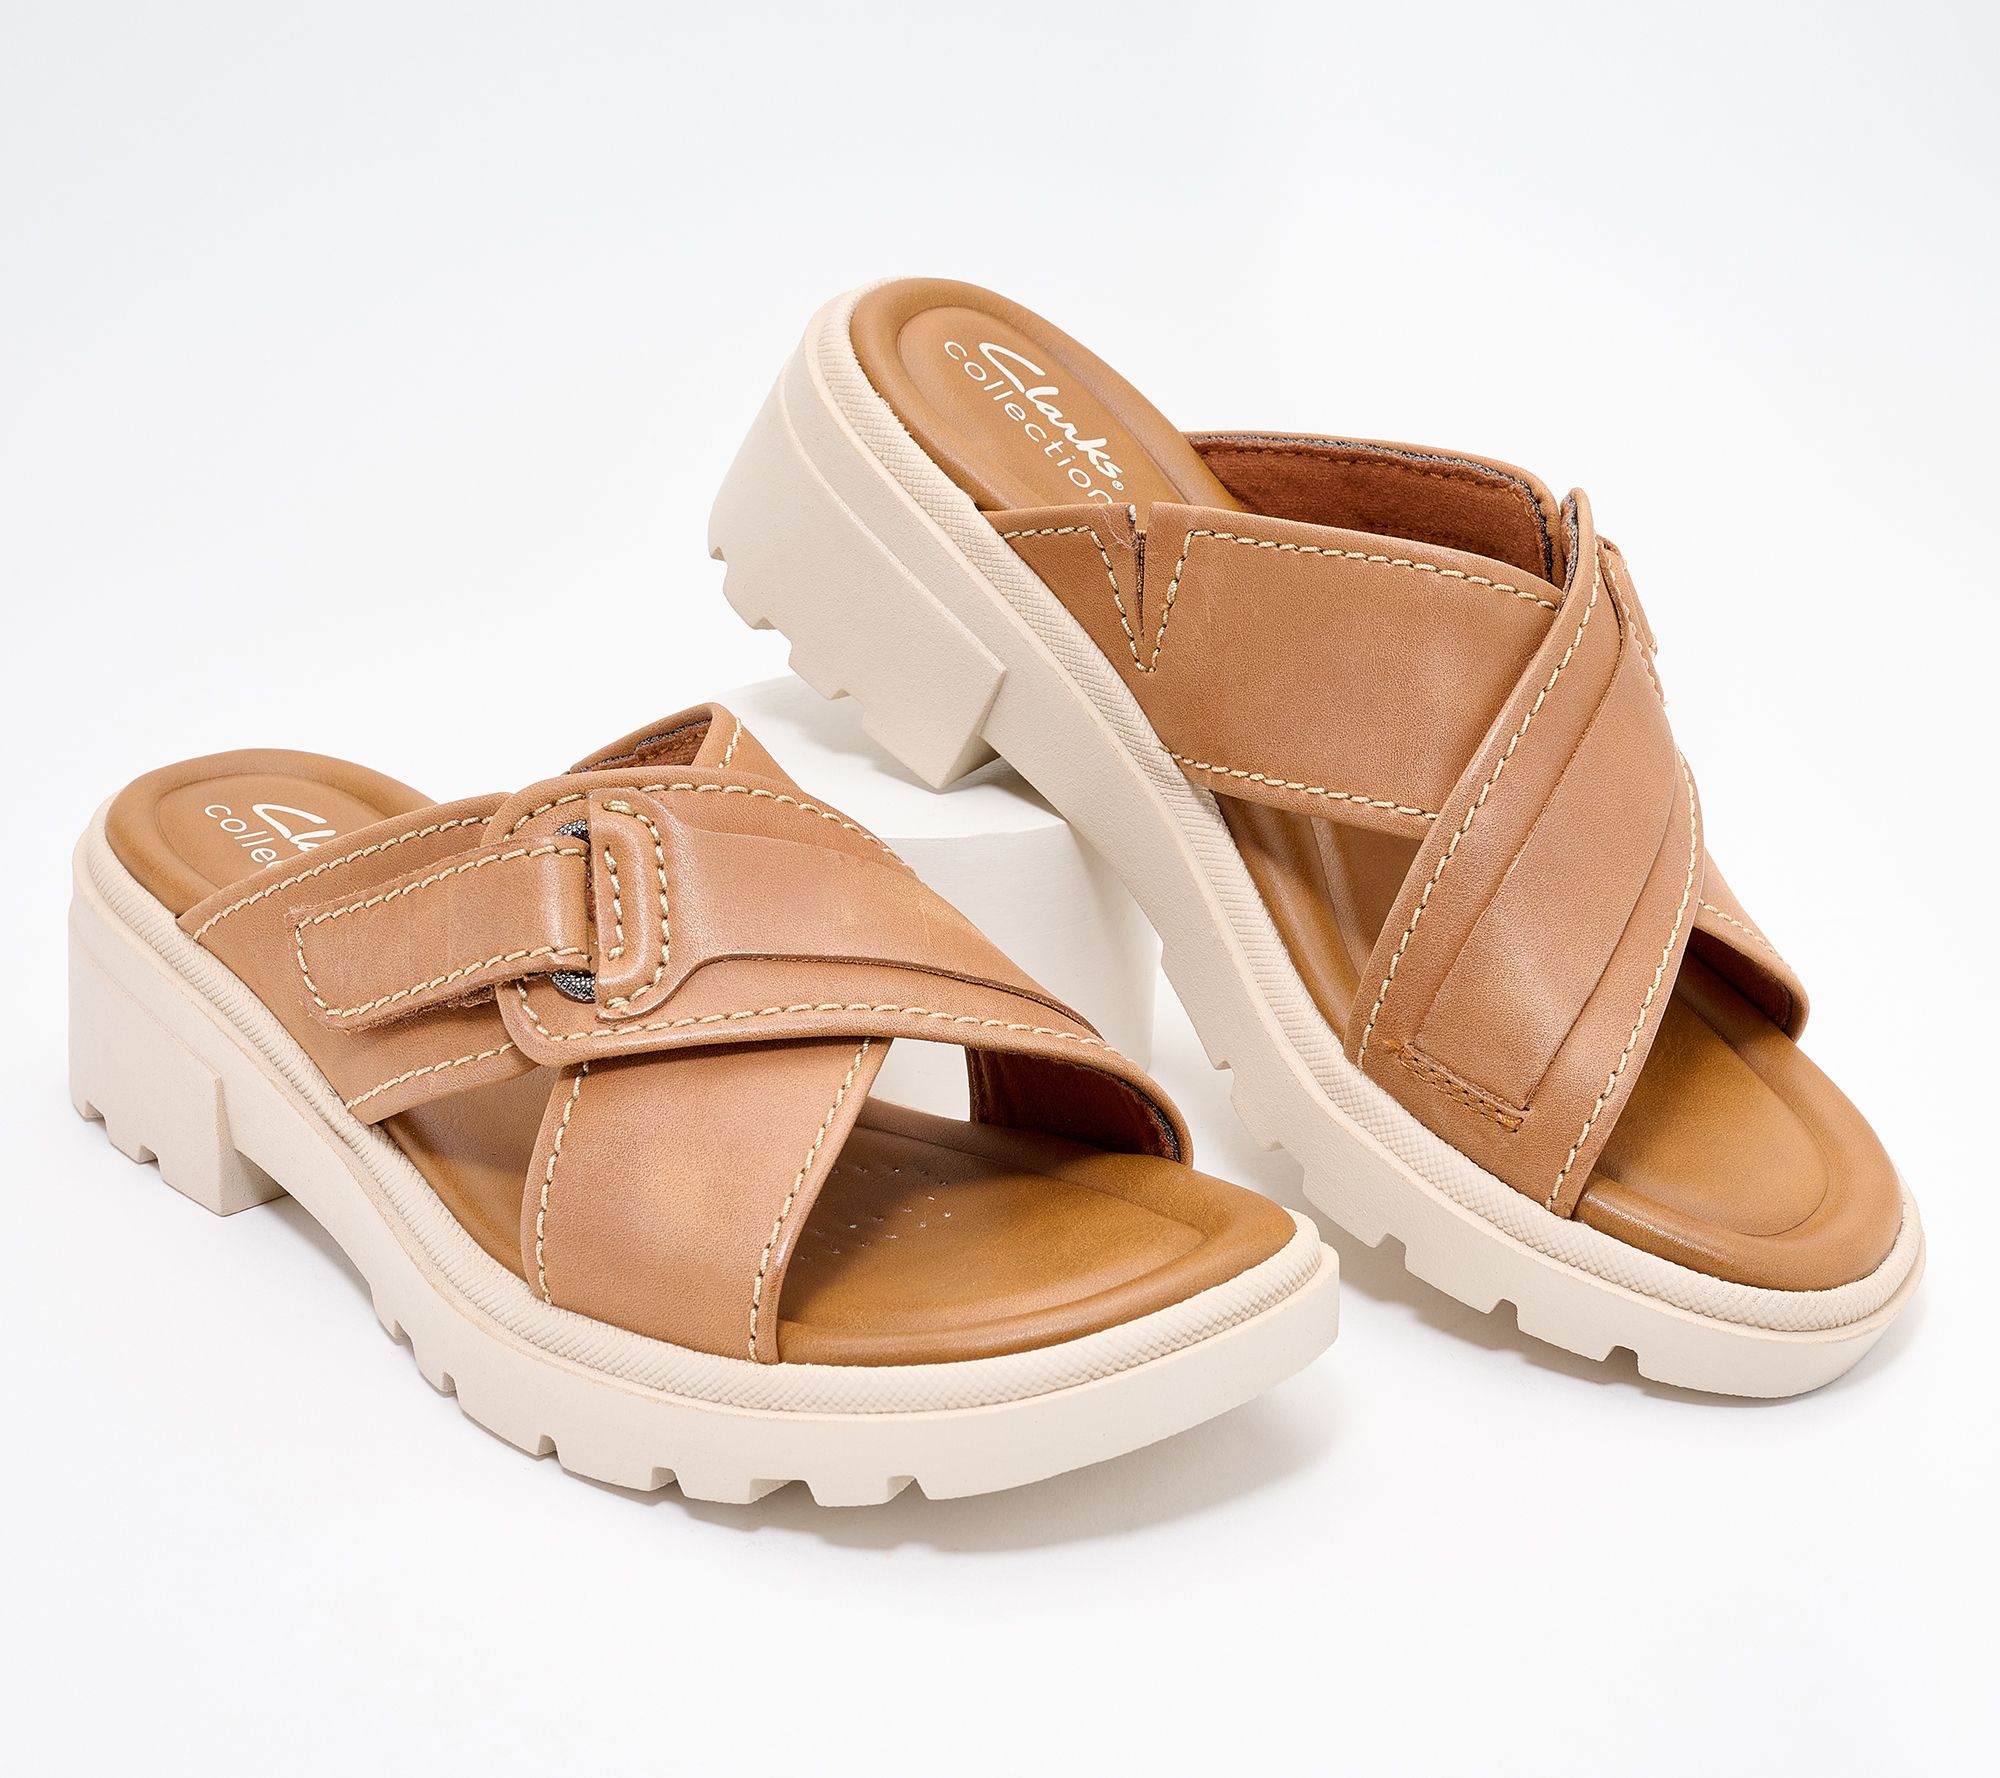 Fare Signal Watchful Clarks Collection Leather Slide Sandals - Coast Cross - QVC.com